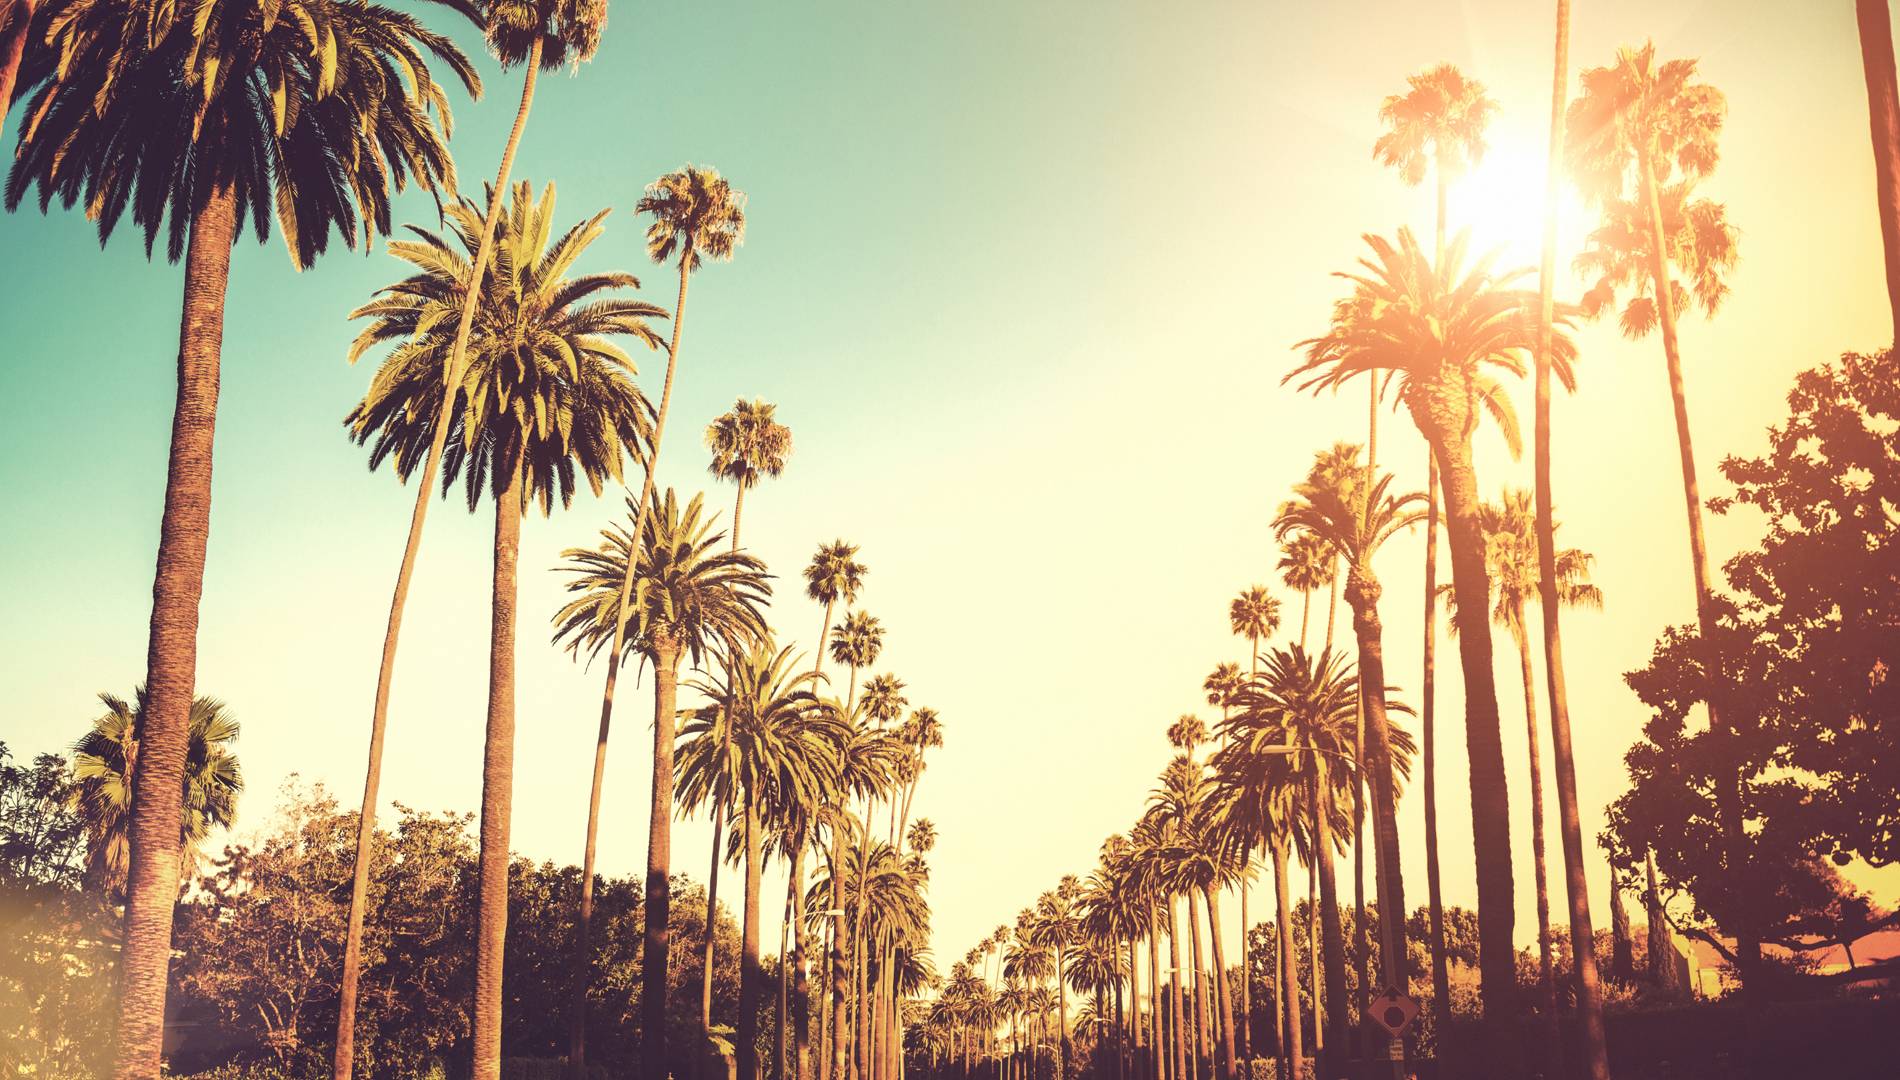 Los Angeles Palm Trees Wallpapers - Top Free Los Angeles Palm Trees